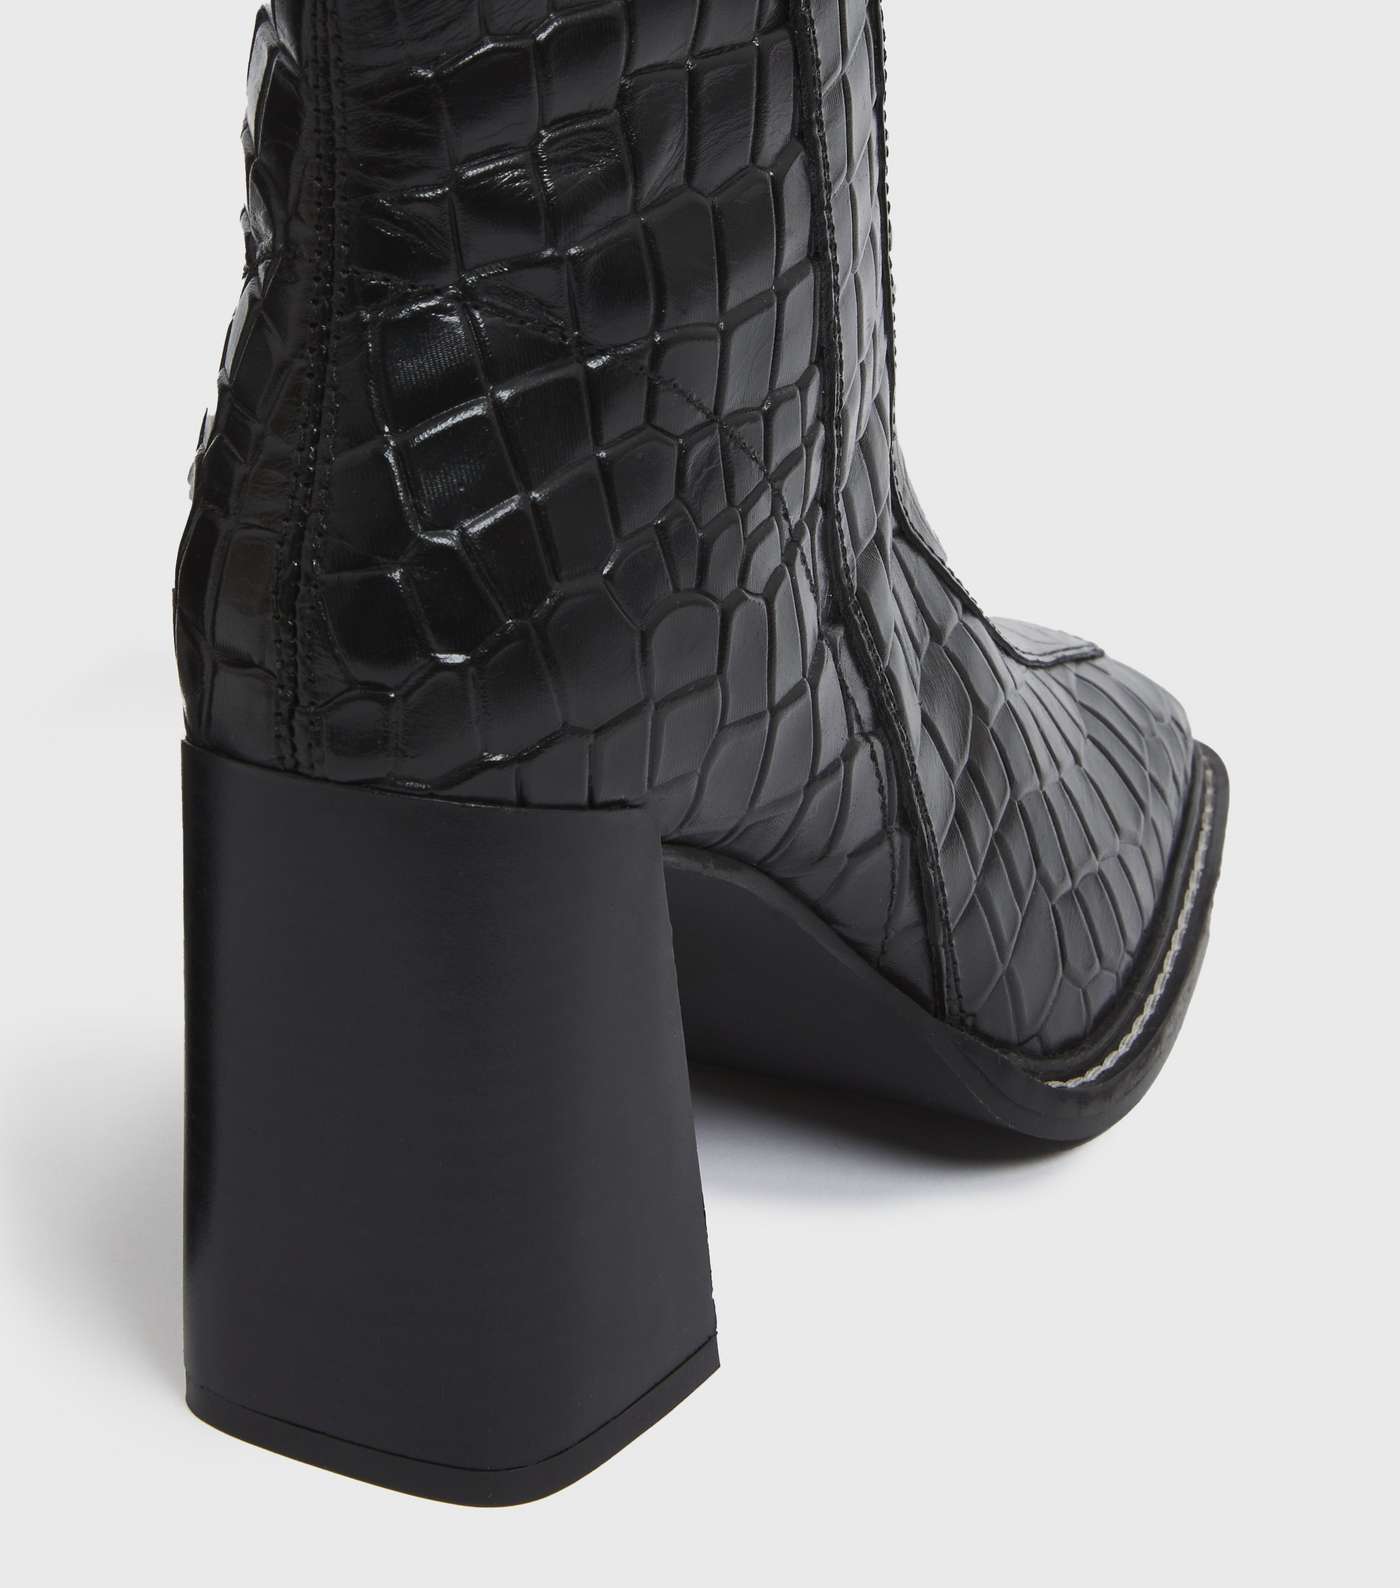 Black Leather Faux Croc Flared Block Heel Ankle Boots Image 5